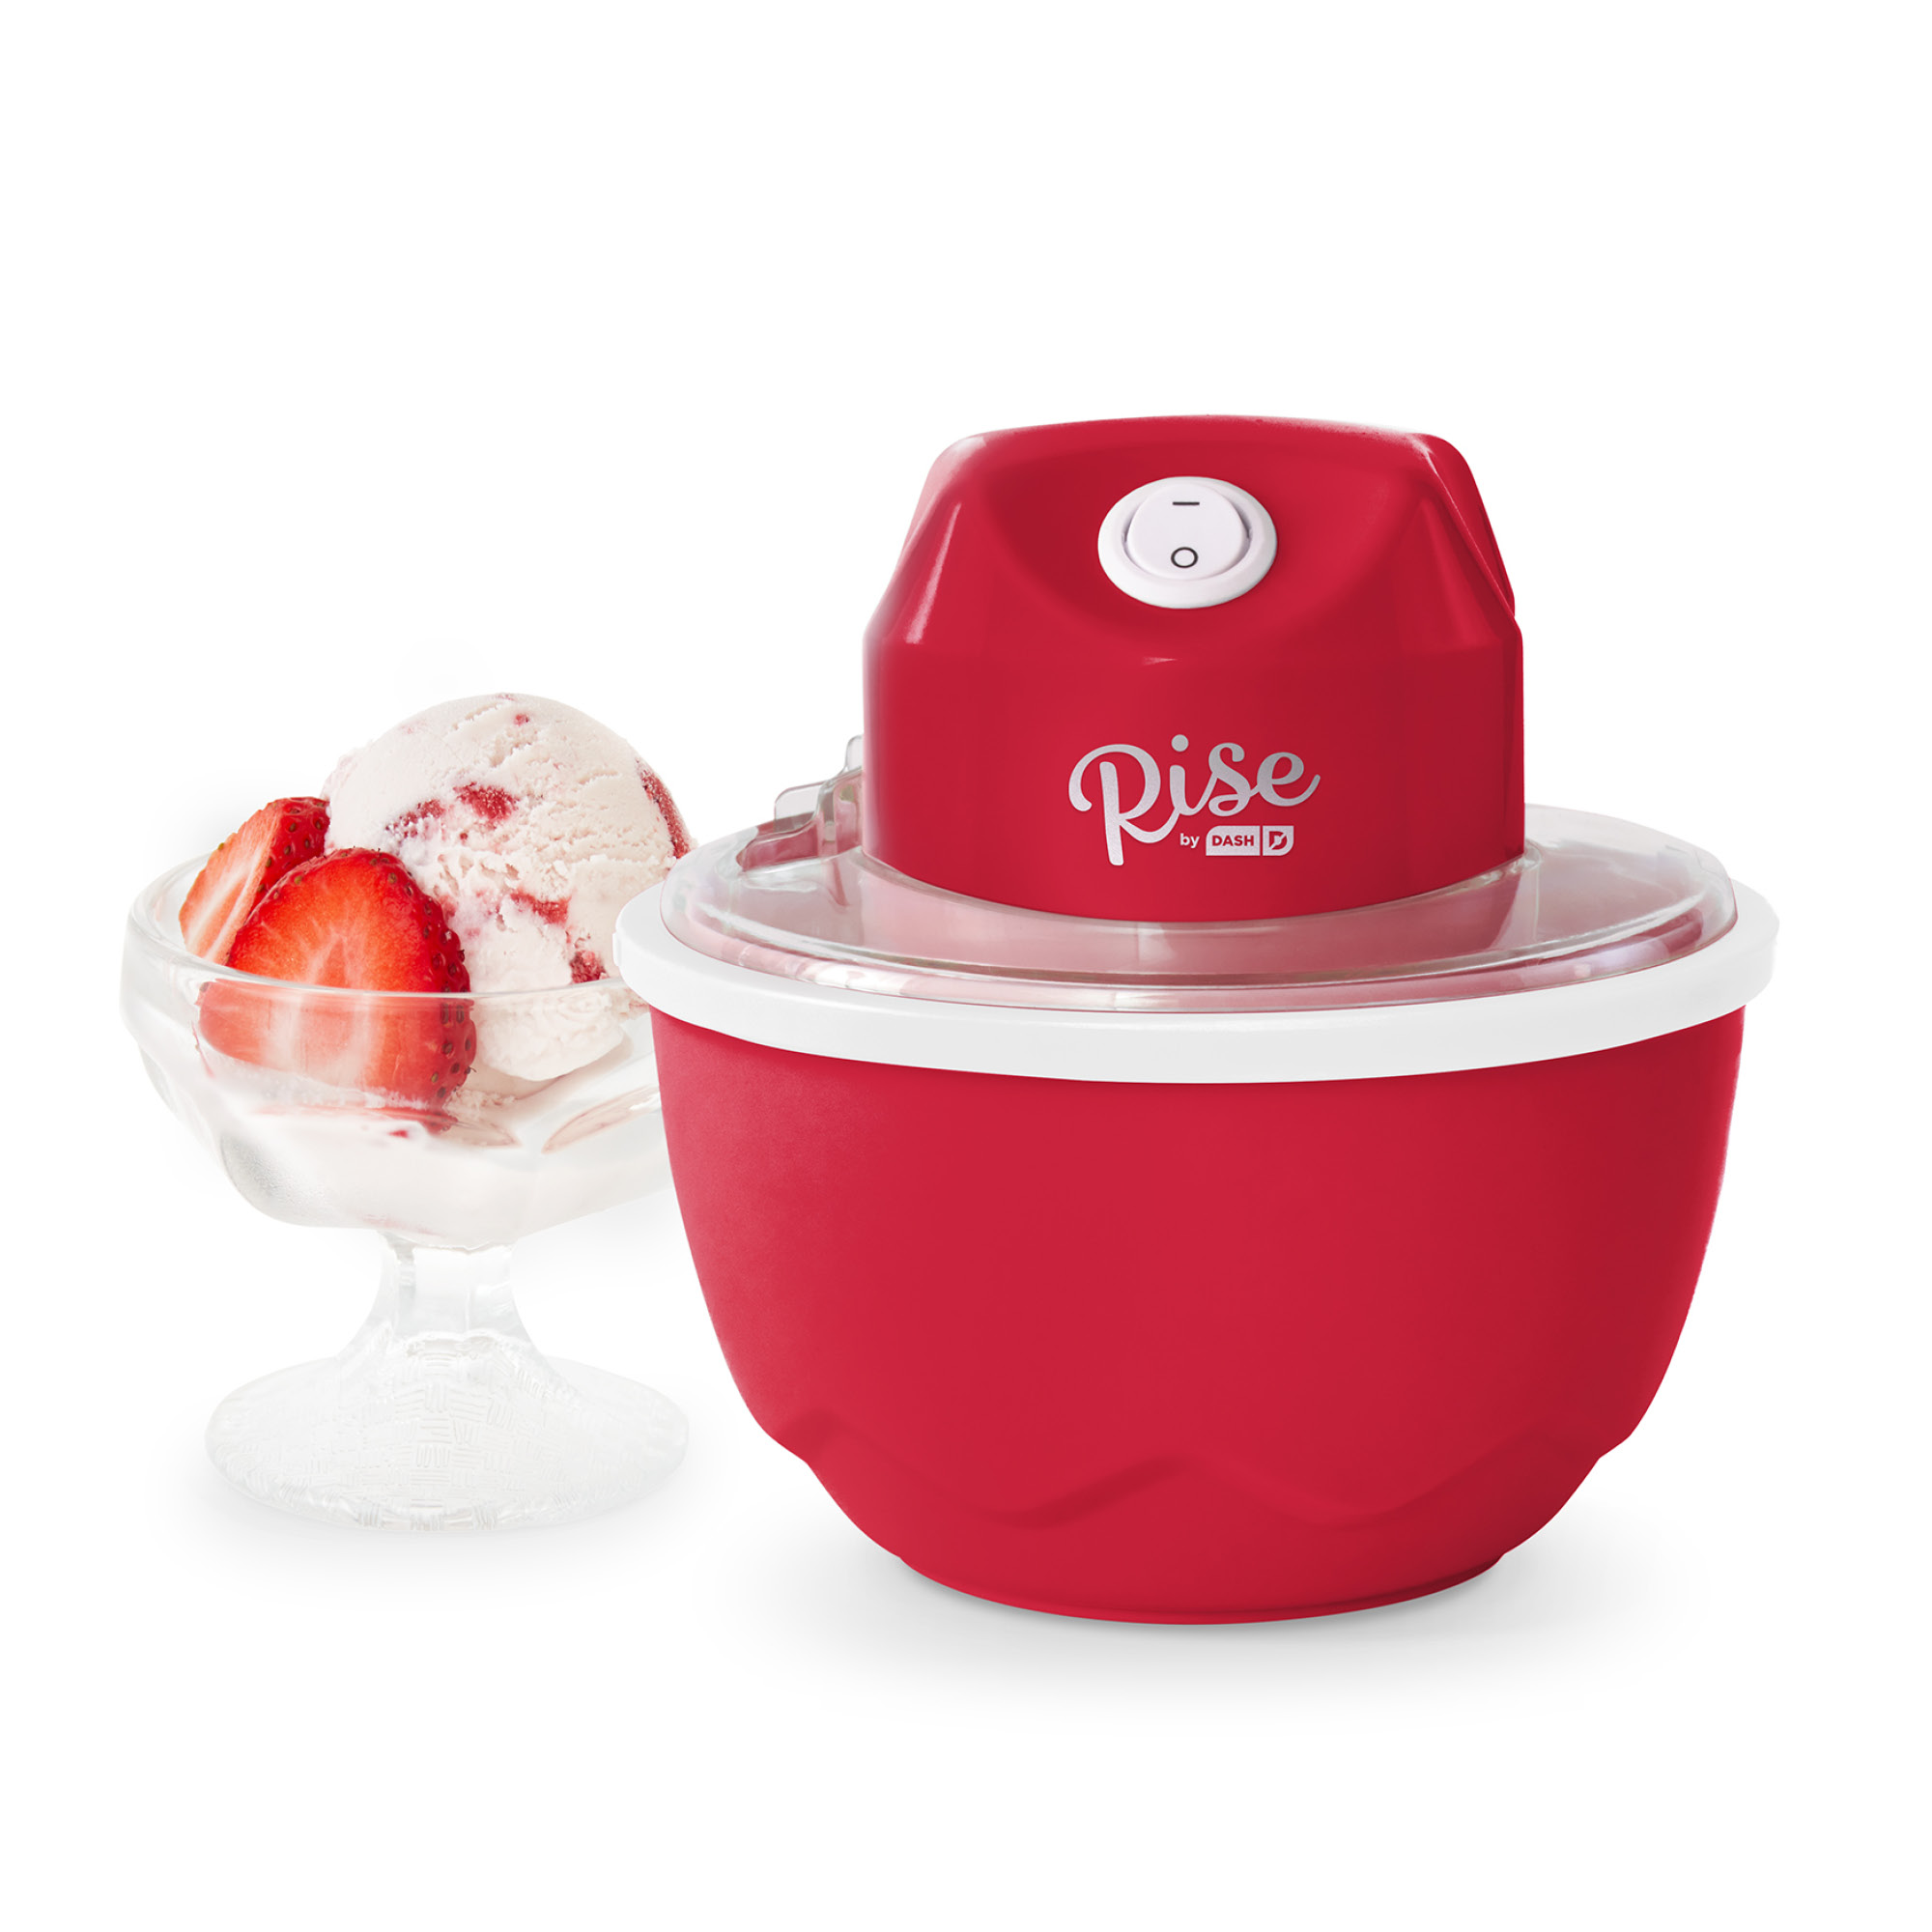 Rise by Dash Personal Electric Ice Cream Maker for Gelato, Sorbet + Frozen Yogurt (Healthy Snacks + Dessert for Kids & Adults) - 1 Pint - Red - 2.6 lb. - image 1 of 7